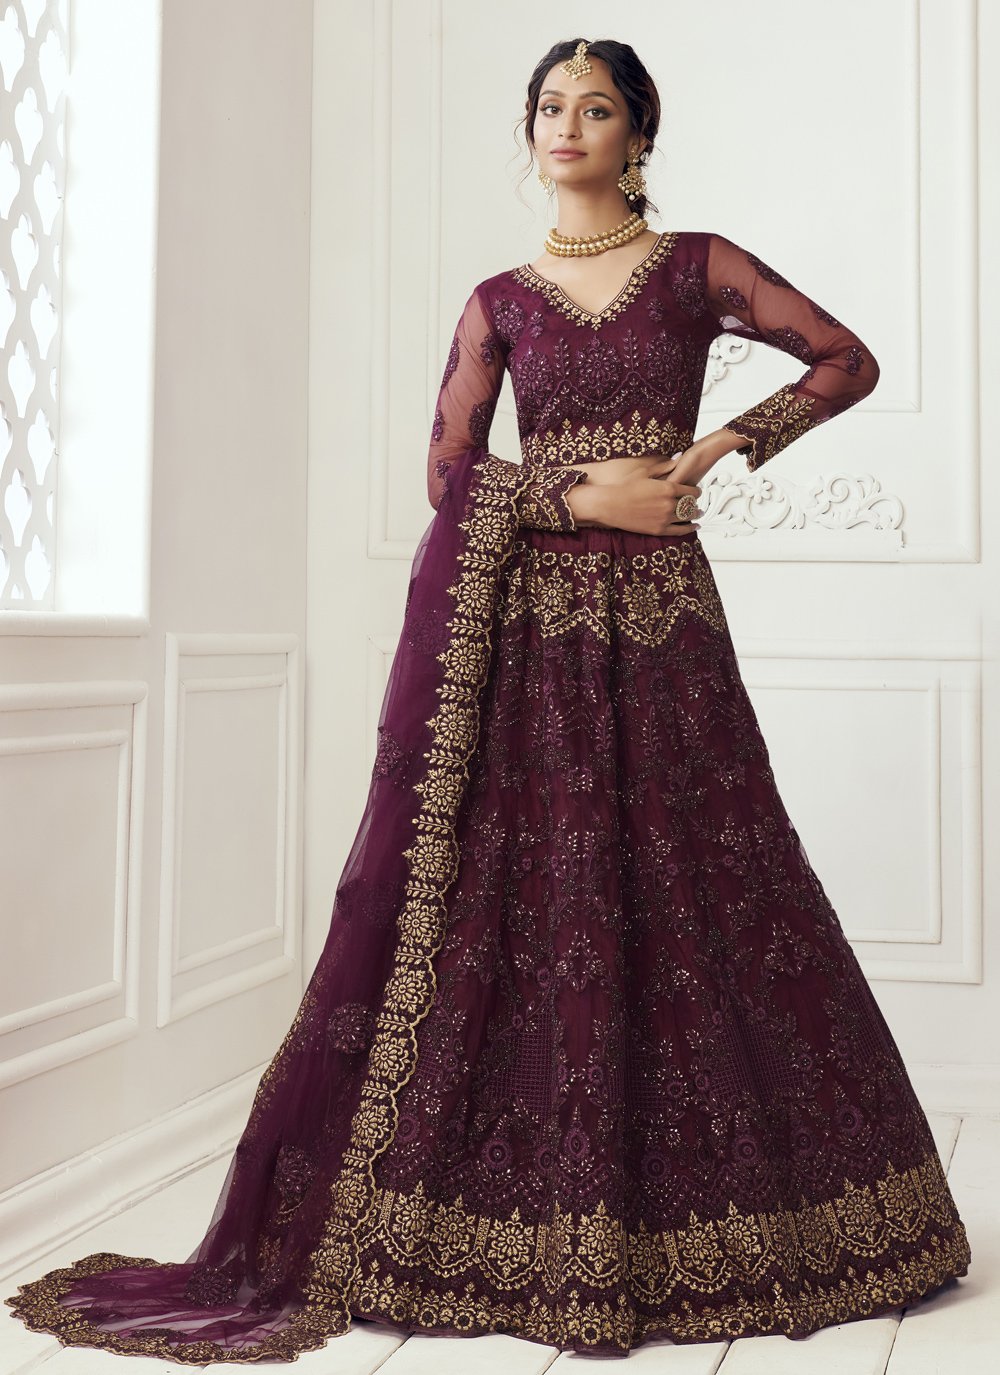 Brides That Picked Wine Coloured Lehengas For Their Wedding Soirees! | Red  bridal dress, Latest bridal lehenga, Indian wedding dress